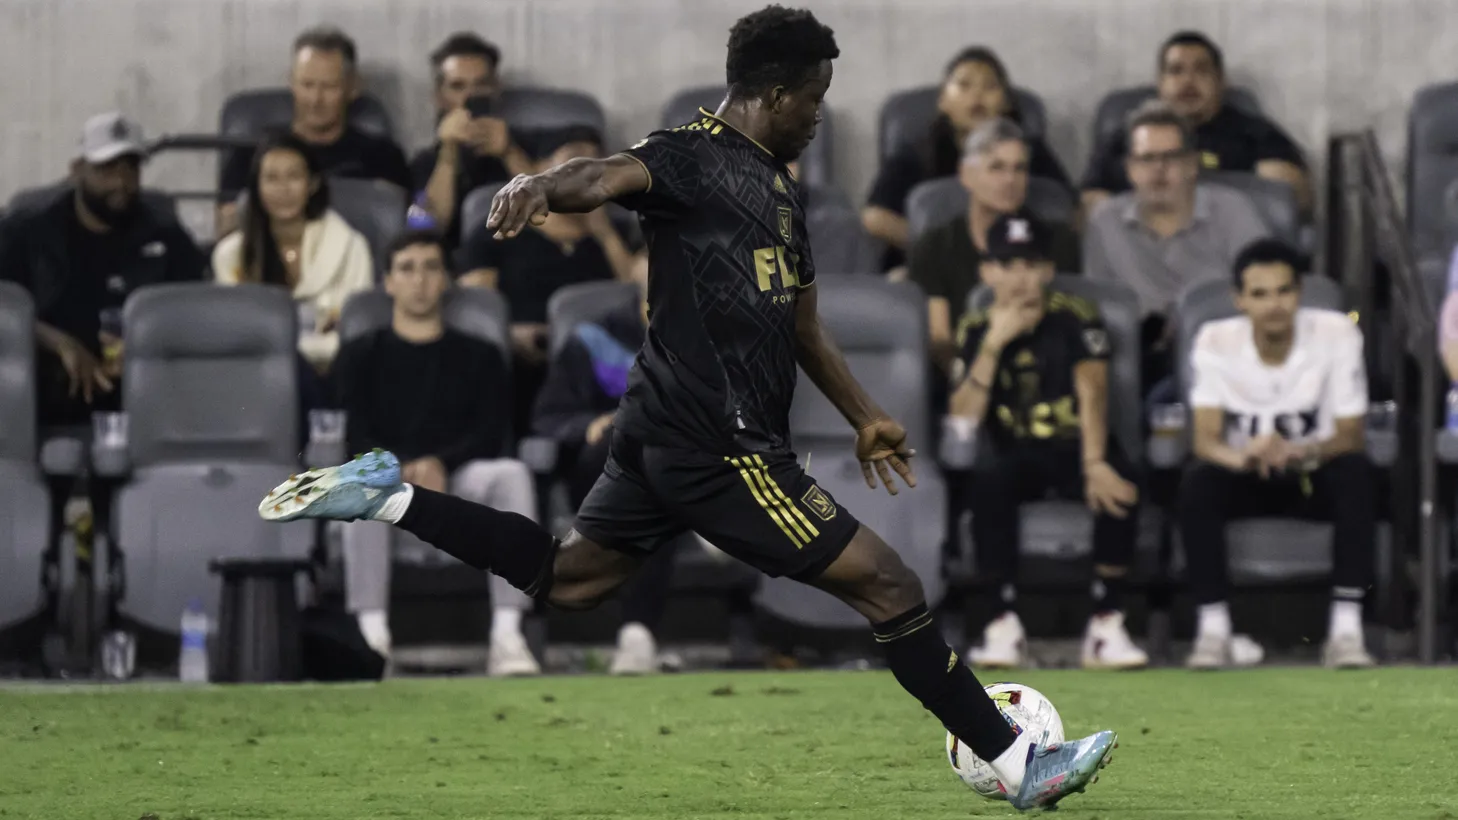 LAFC forward Kwadwo Opoku (22) scores a goal during a MLS match against the FC Dallas, June 29, 2022, at the Banc of California Stadium in Los Angeles, CA. LAFC defeated FC Dallas 3-1.